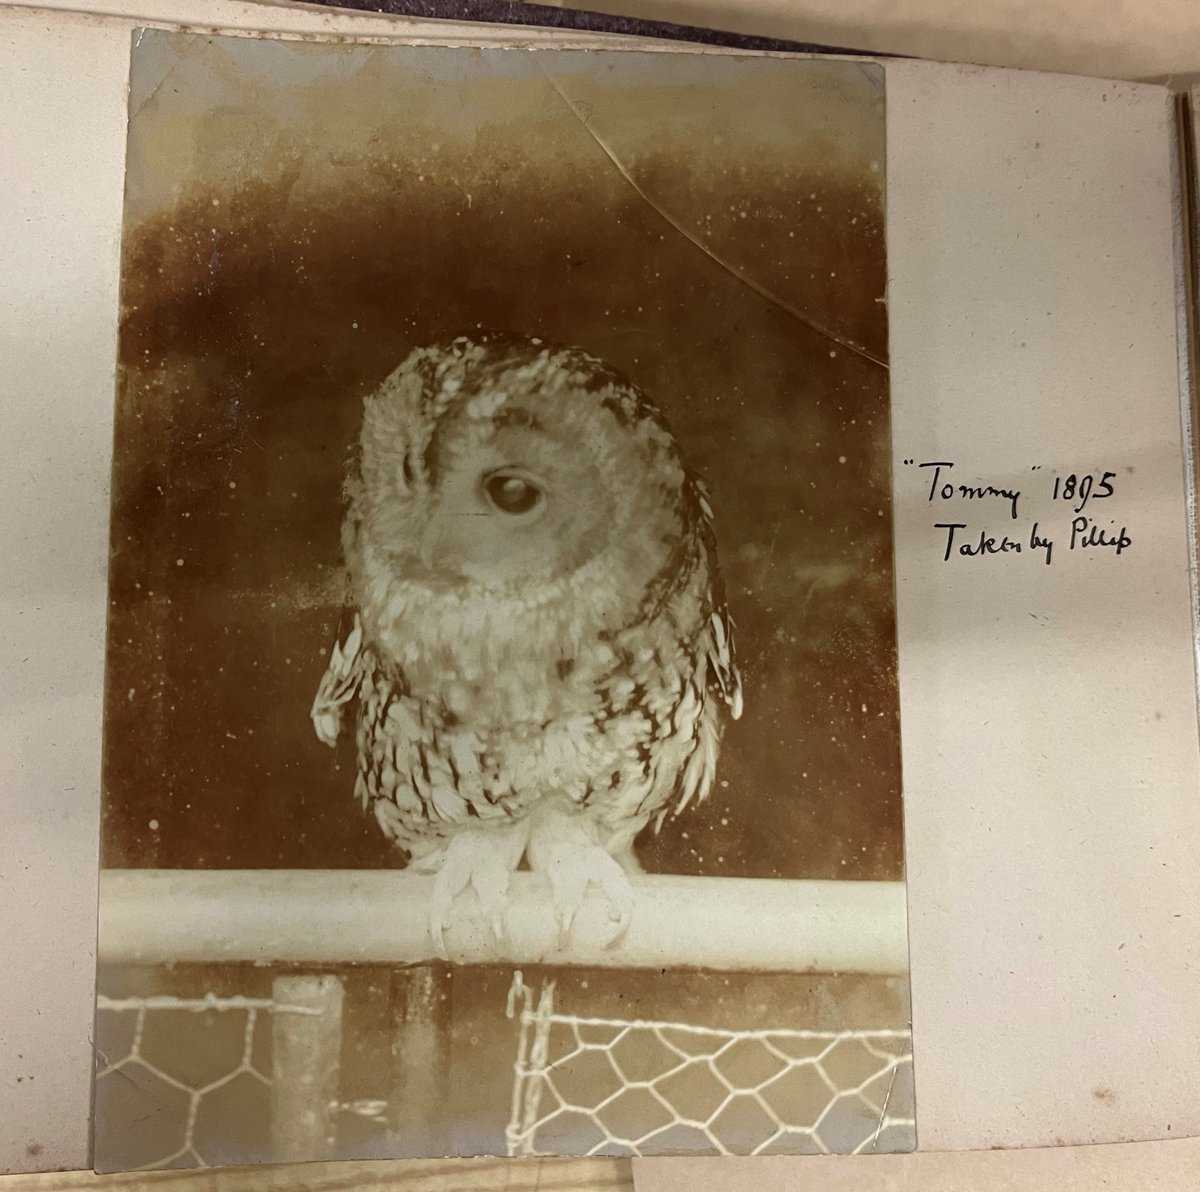 We have quite a few photographs of pets in the archives, but here's an unusual one: Tommy the owl, taken in 1895. He probably belonged to the Turnull family of Sandybrook Hall, Ashbourne .
#ArchiveAnimals #Archive30